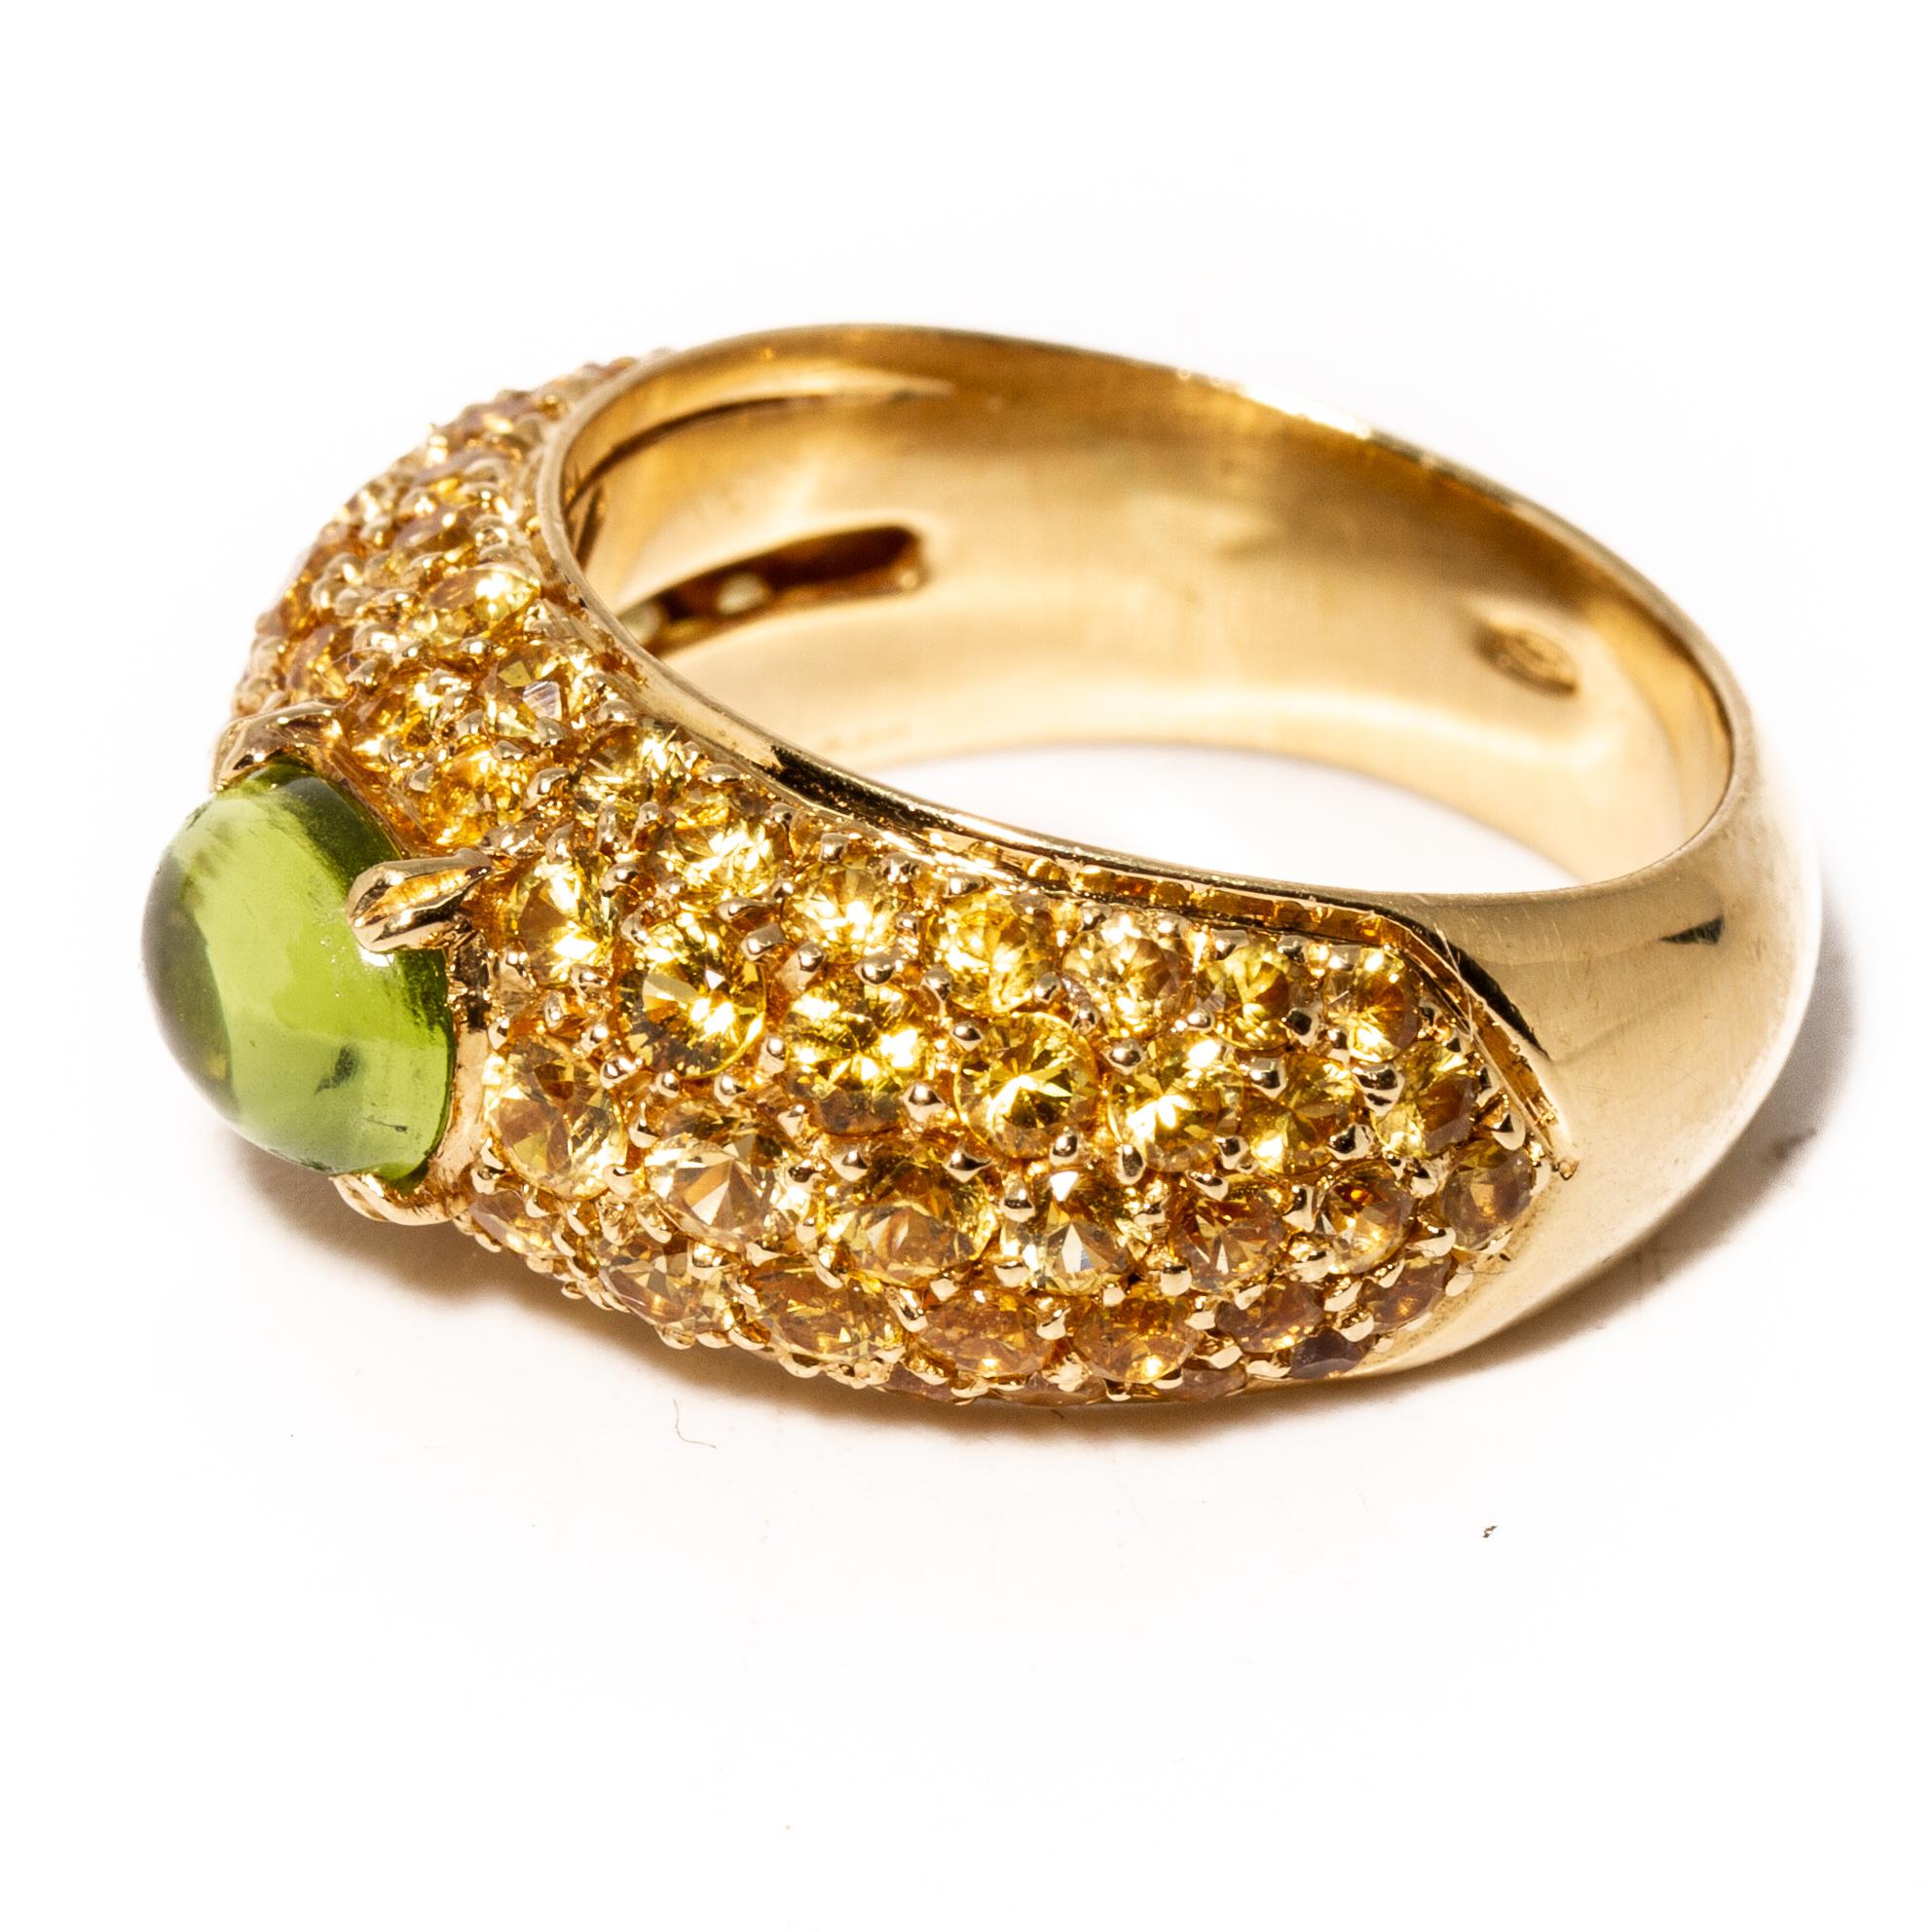 18k gold half band ring by Versace. Set with yellow gemstones and cabochon peridot - 7.7mm x 5.8mm. Measures - 7, ring band is 10mm at widest point. Weight 10.2 grams. Marked Gianni Versace 750 GV.